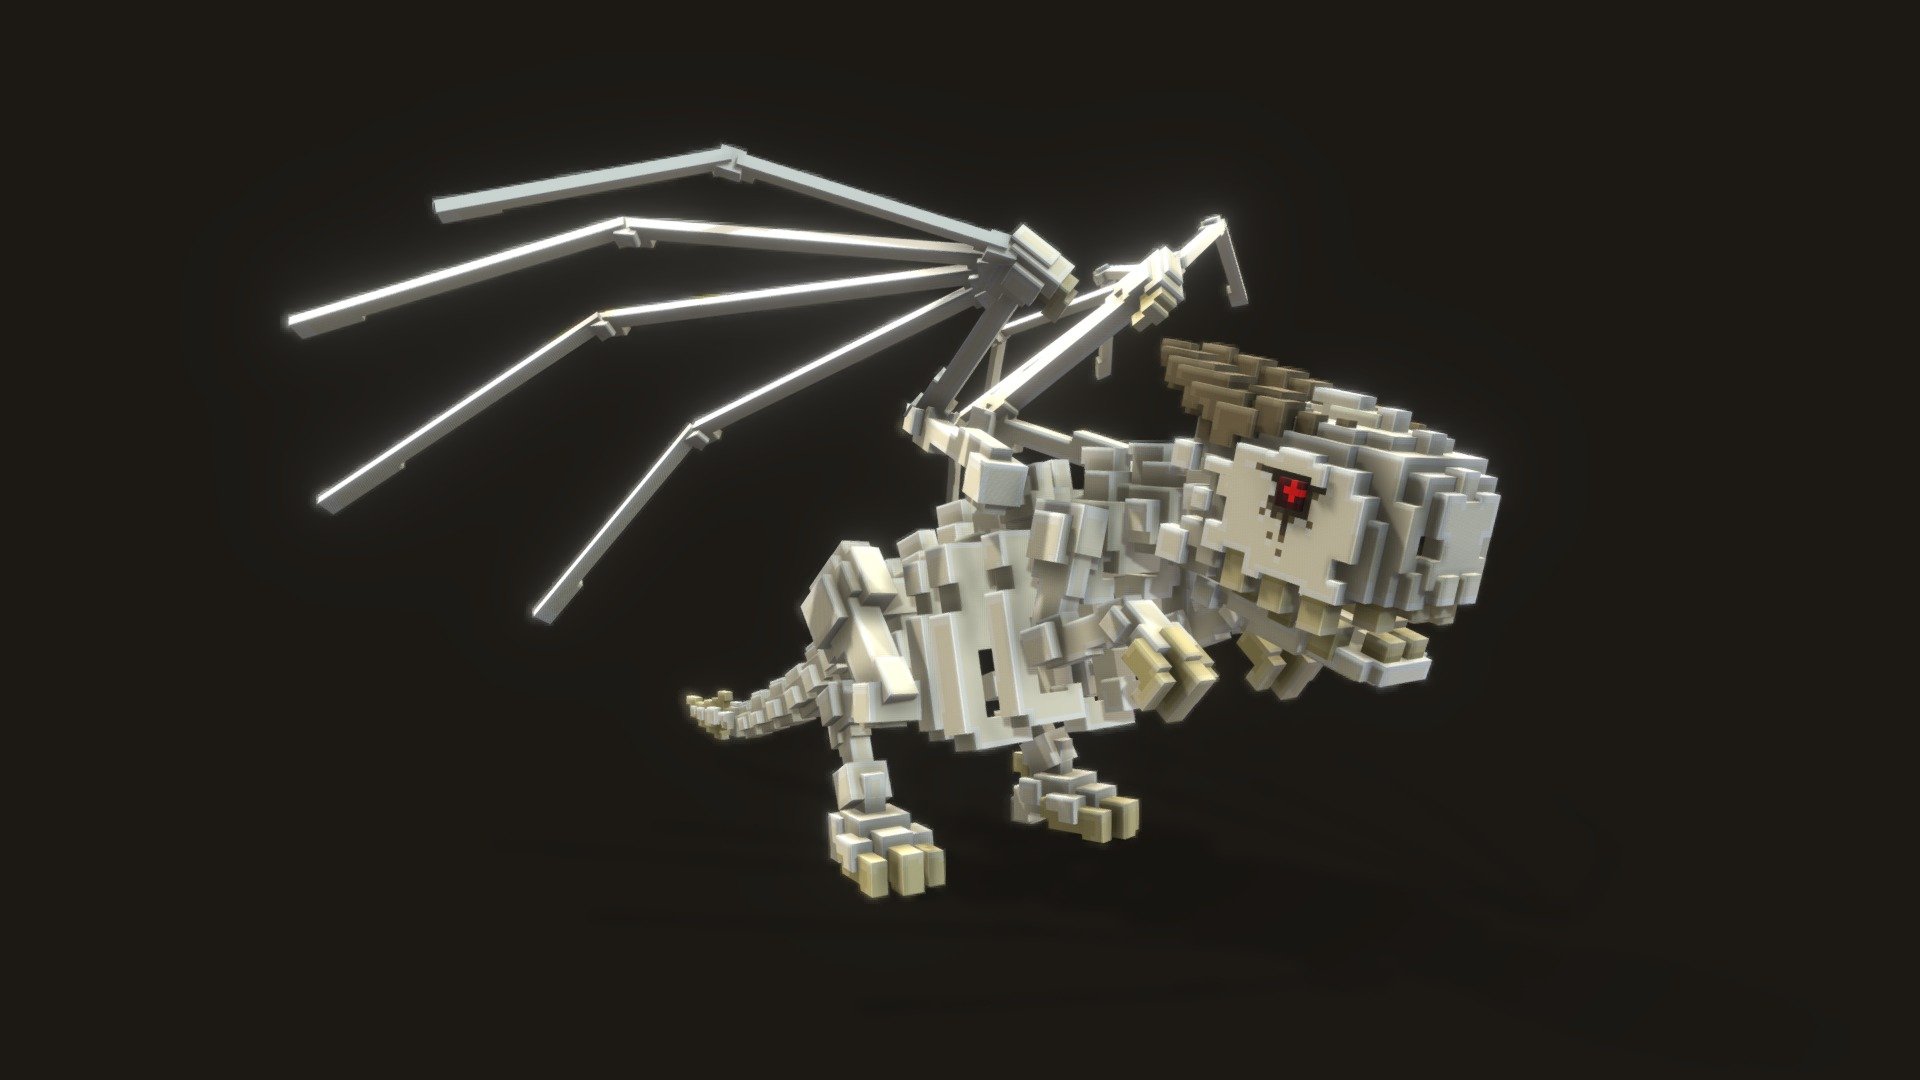 Bone Dragon - My first fully rigged and animated voxel model. This dragon gave me sleepless nights but i did learn so much on this model and it was quite some fun to dip my toes into rigging and animating. I did this model for The Sandbox Creators Contest 

Animations: 
1. Idle /
2. Run /
3. Attack /
4. Get Hit /
5. Air Jump /
6. Fly /
7. Death 

animated in VoxEdit - Voxel Bone Dragon - 3D model by voxelgem 3d model